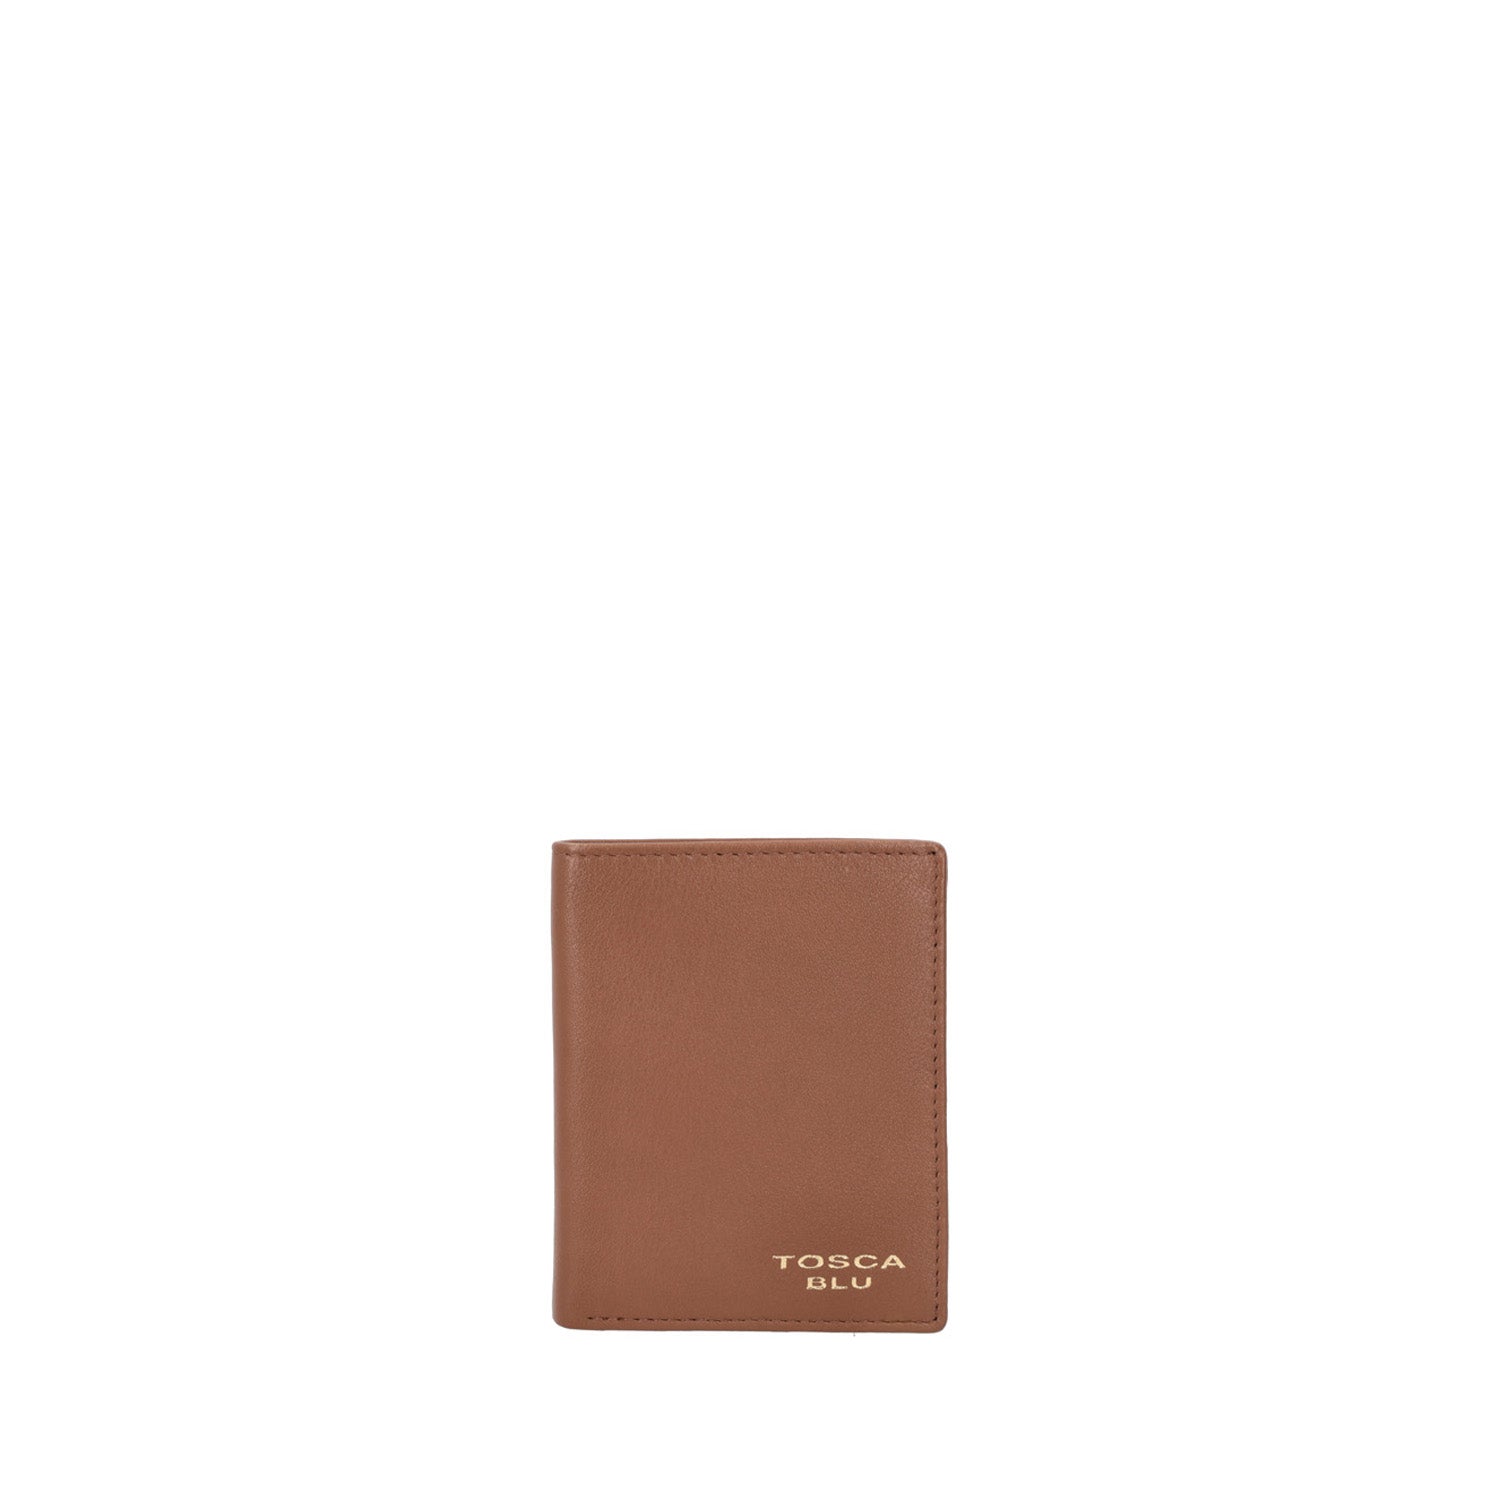 TAN MARGHERITA SMALL LEATHER WALLET